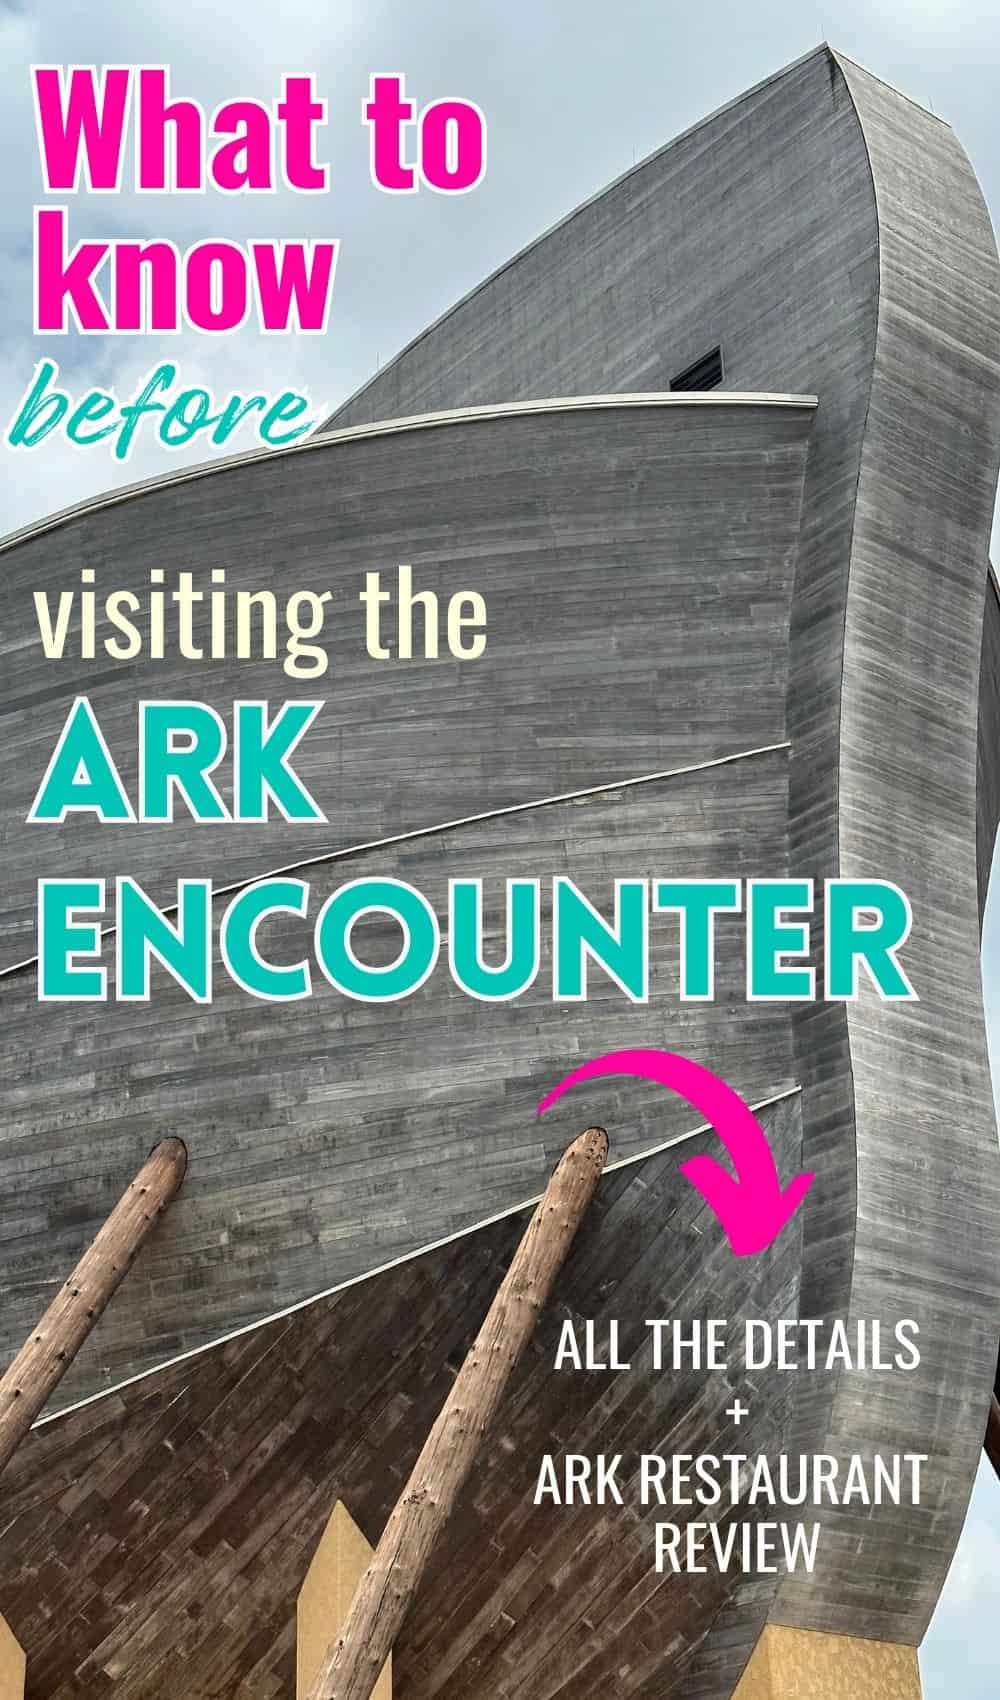 Complete Ark Encounter Review With Tips For Planning Your Ark Encounter Trip Chicken